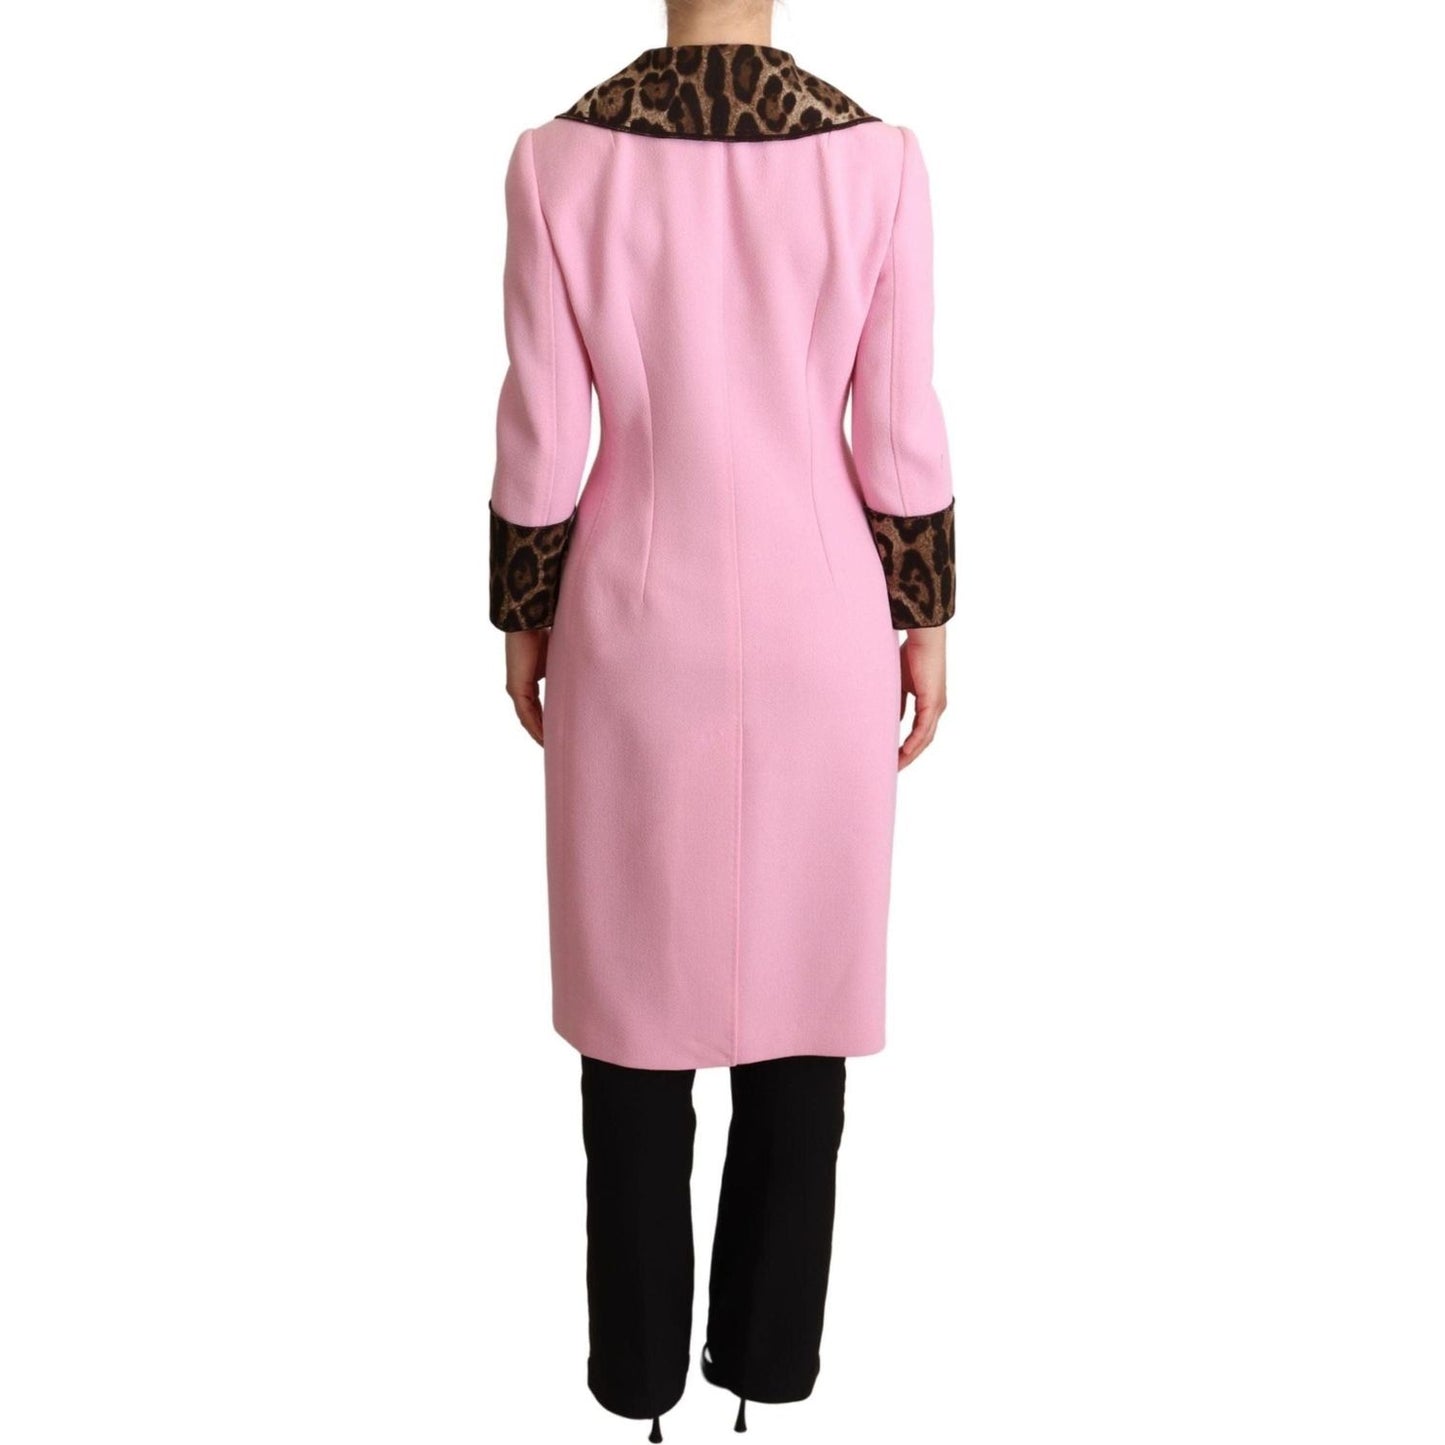 Dolce & Gabbana Chic Pink Leopard Trench with Crystal Buttons pink-leopard-wool-trenchcoat-jacket